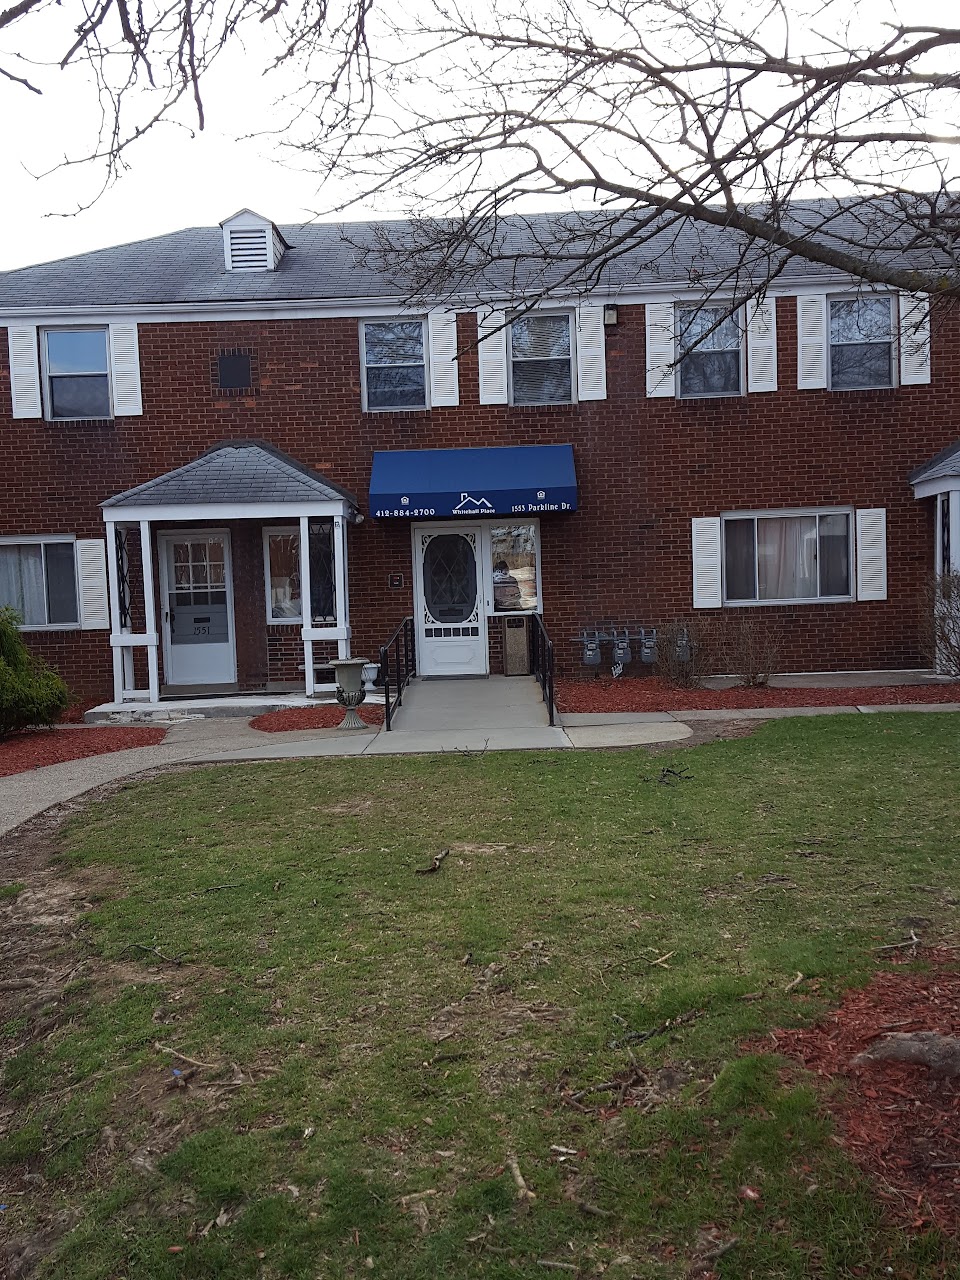 Photo of APARTMENTS AT WHITEHALL. Affordable housing located at 1651 SKYLINE DR PITTSBURGH, PA 15227